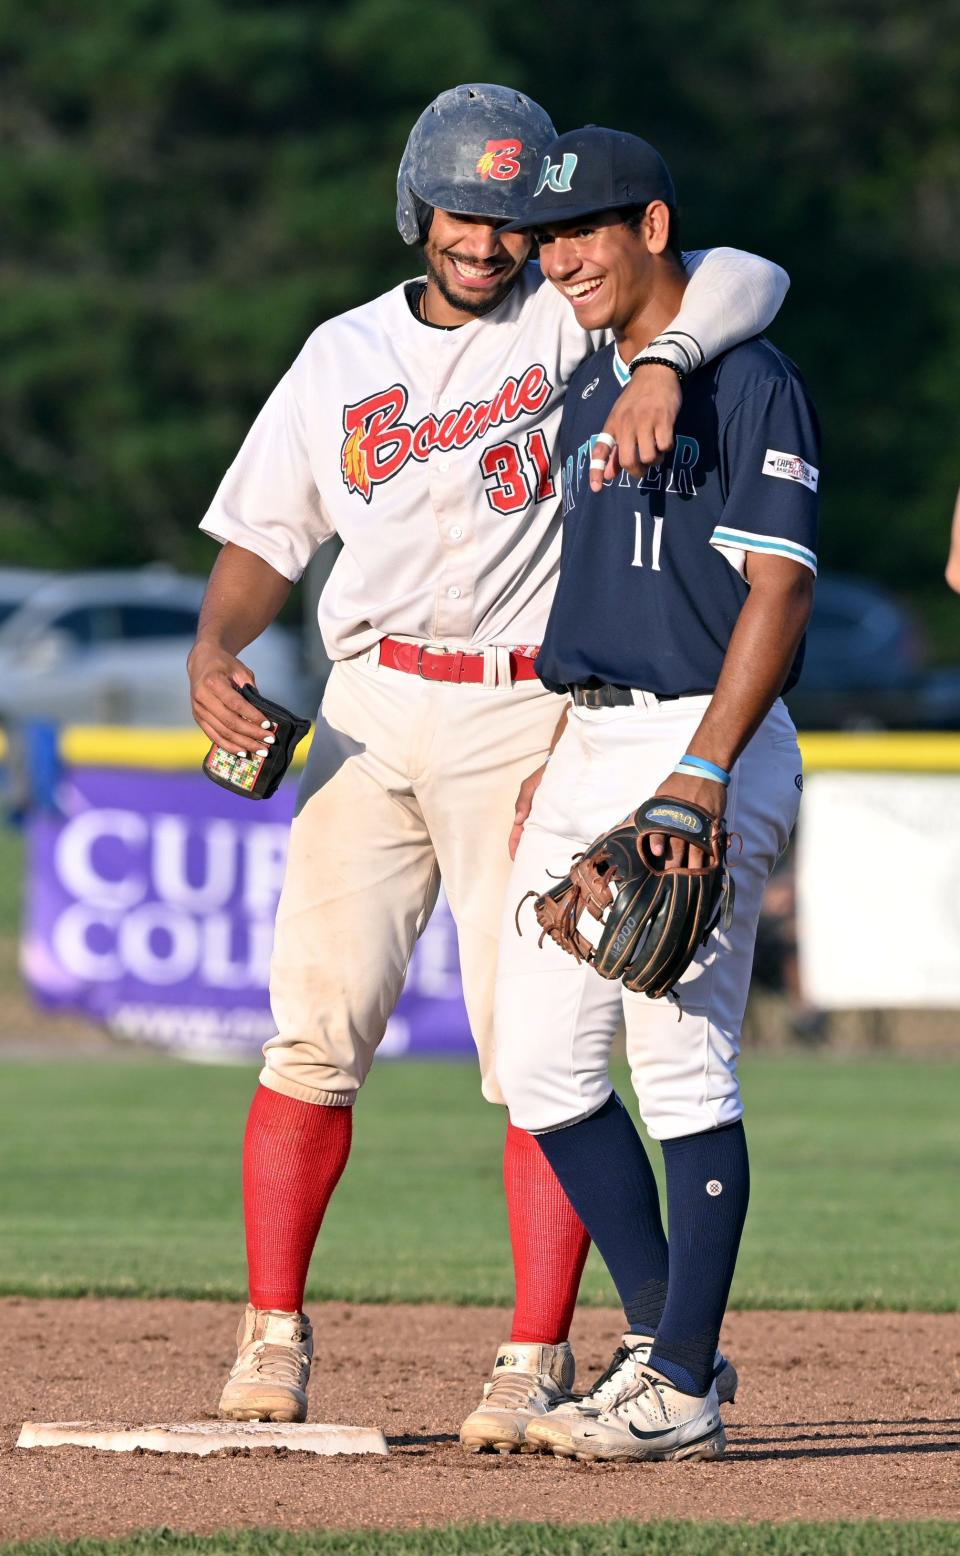 Vanderbelt teammates Davis Diaz of Brewster and Alan Espinal of Bourne share a moment after Espinal safely arrives at second during Wednesday's game in Bourne.